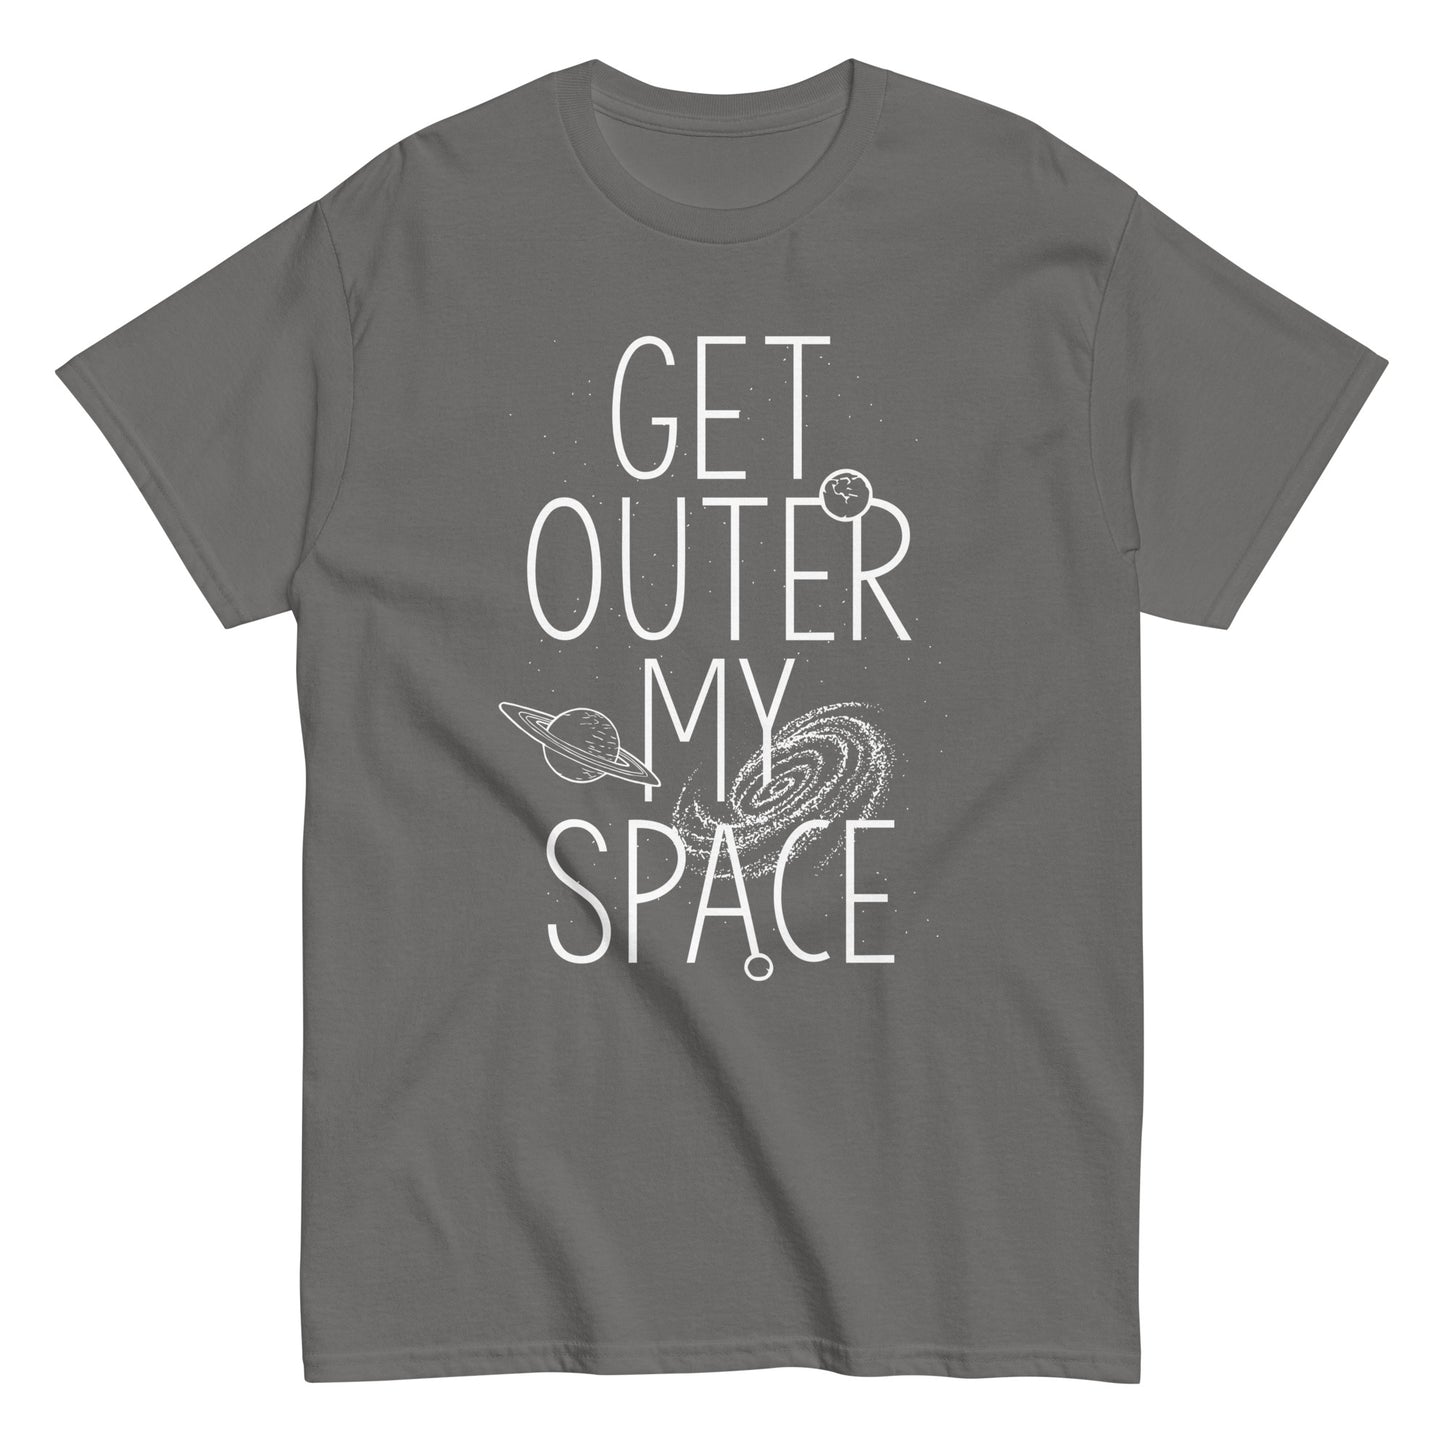 Get Outer My Space Men's Classic Tee